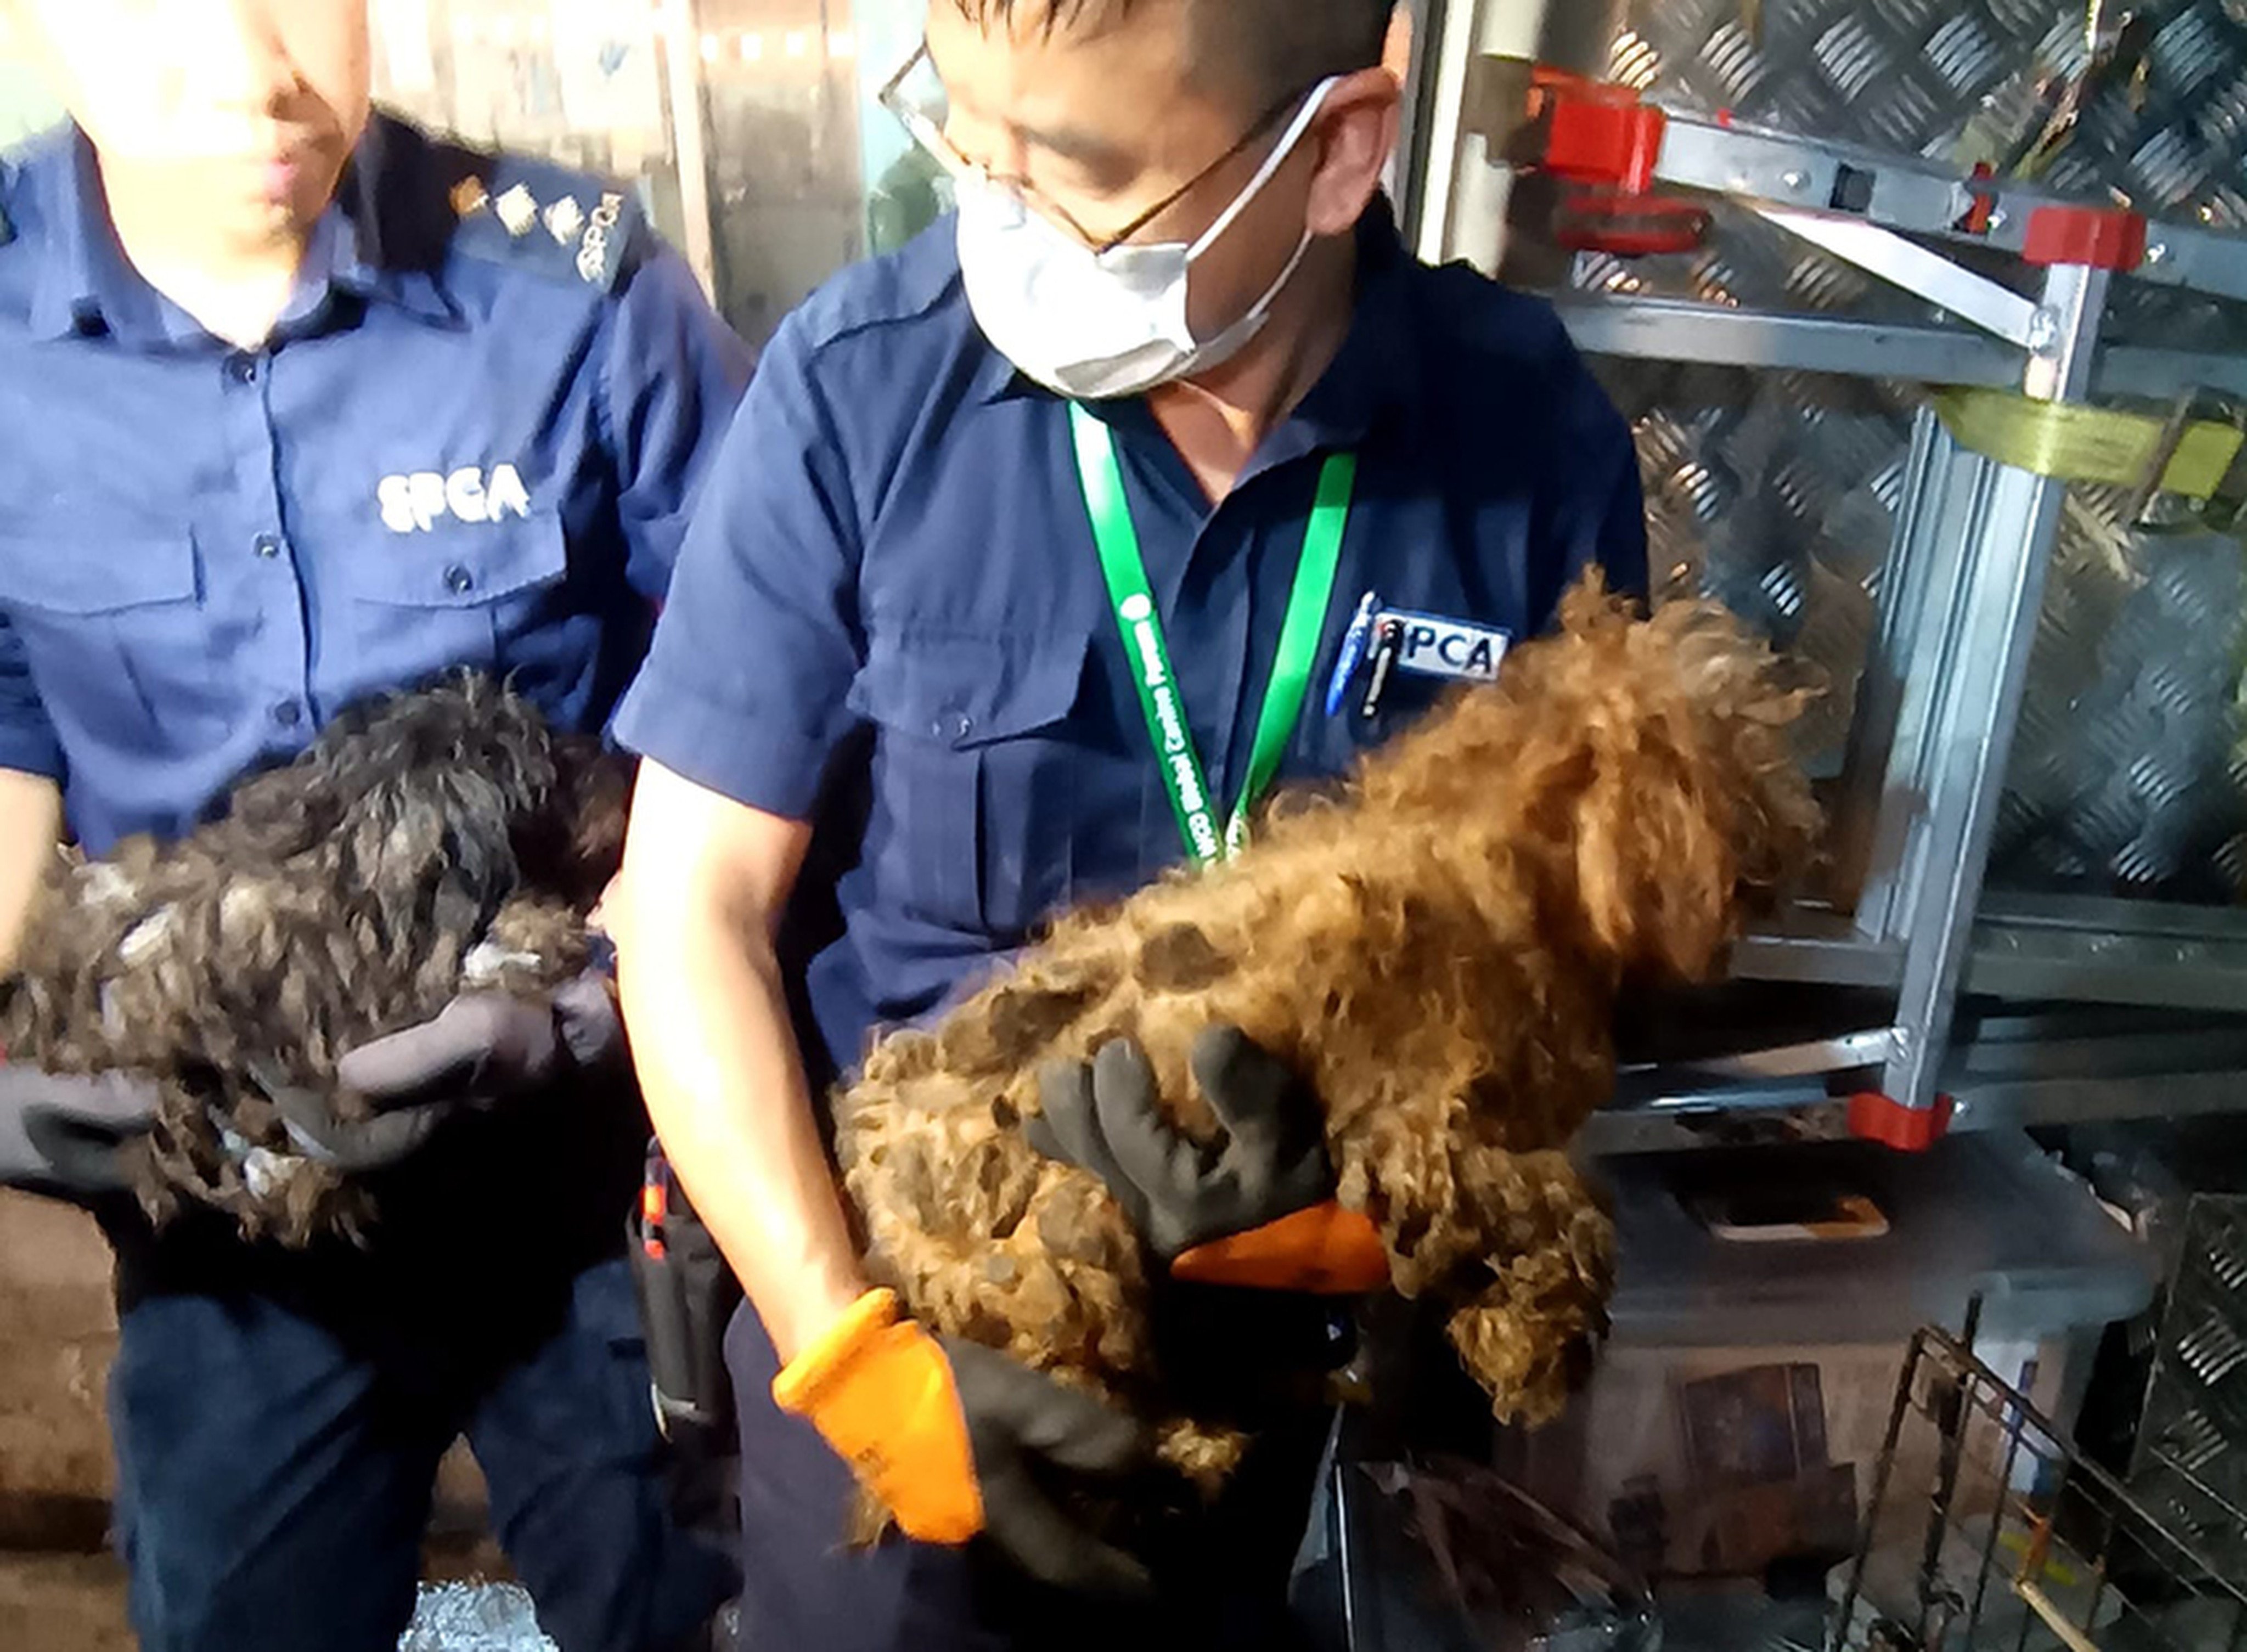 SPCA staff with some of the 41 dogs and cats rescued from appalling conditions in a flat. Photo: Handout